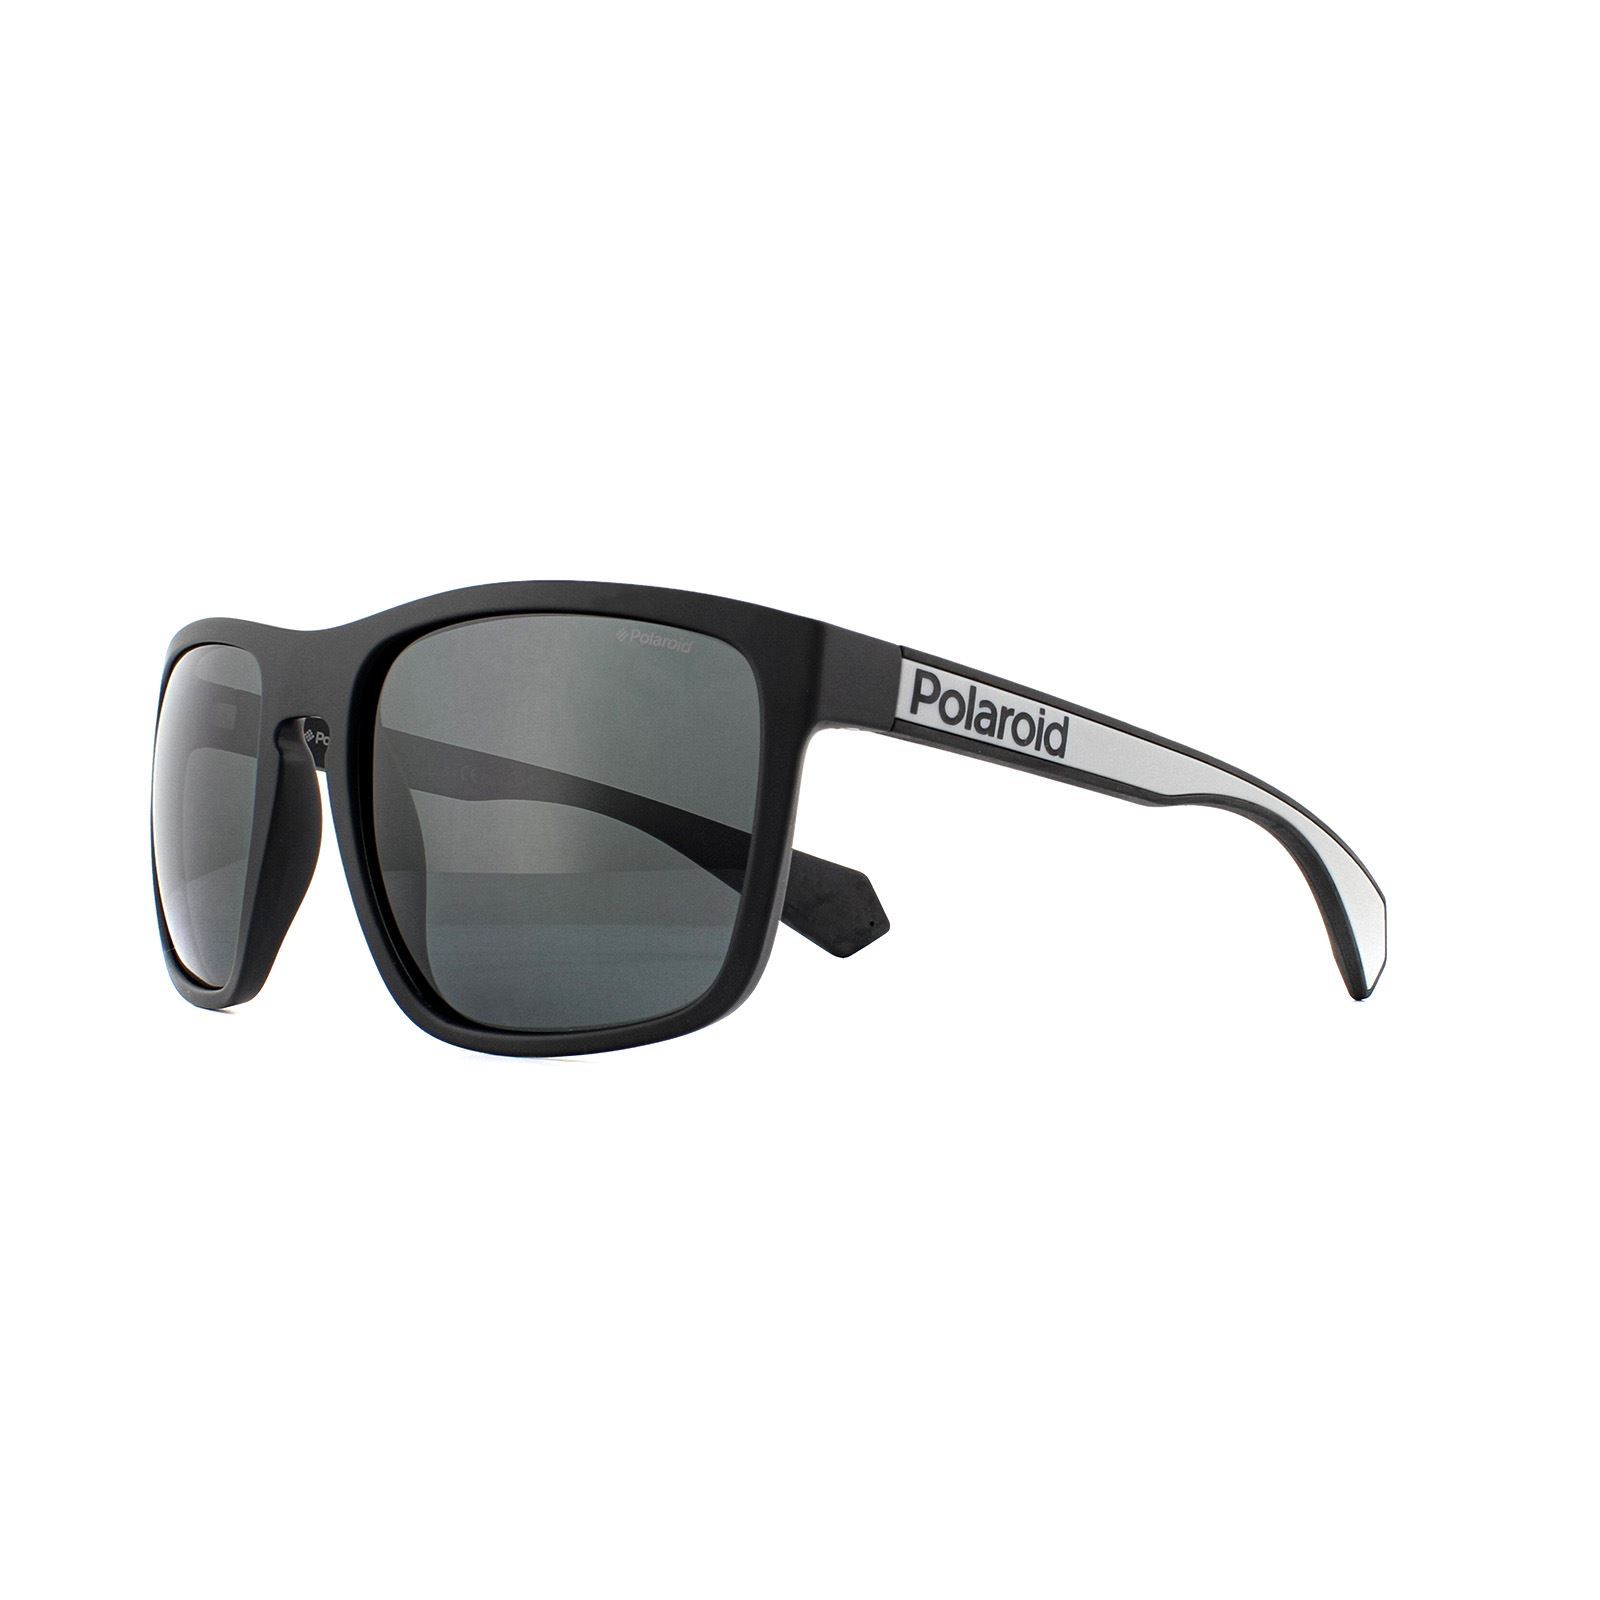 Polaroid Sunglasses PLD 2079/S 003 M9 Matte Black Grey Polarized are a modern sporty style with bright colour stripe down the temples but the stand out feature are Polaroid's superb polarized lenses which will take away the glare and leave your eyes free to look at the scene around without squinting.